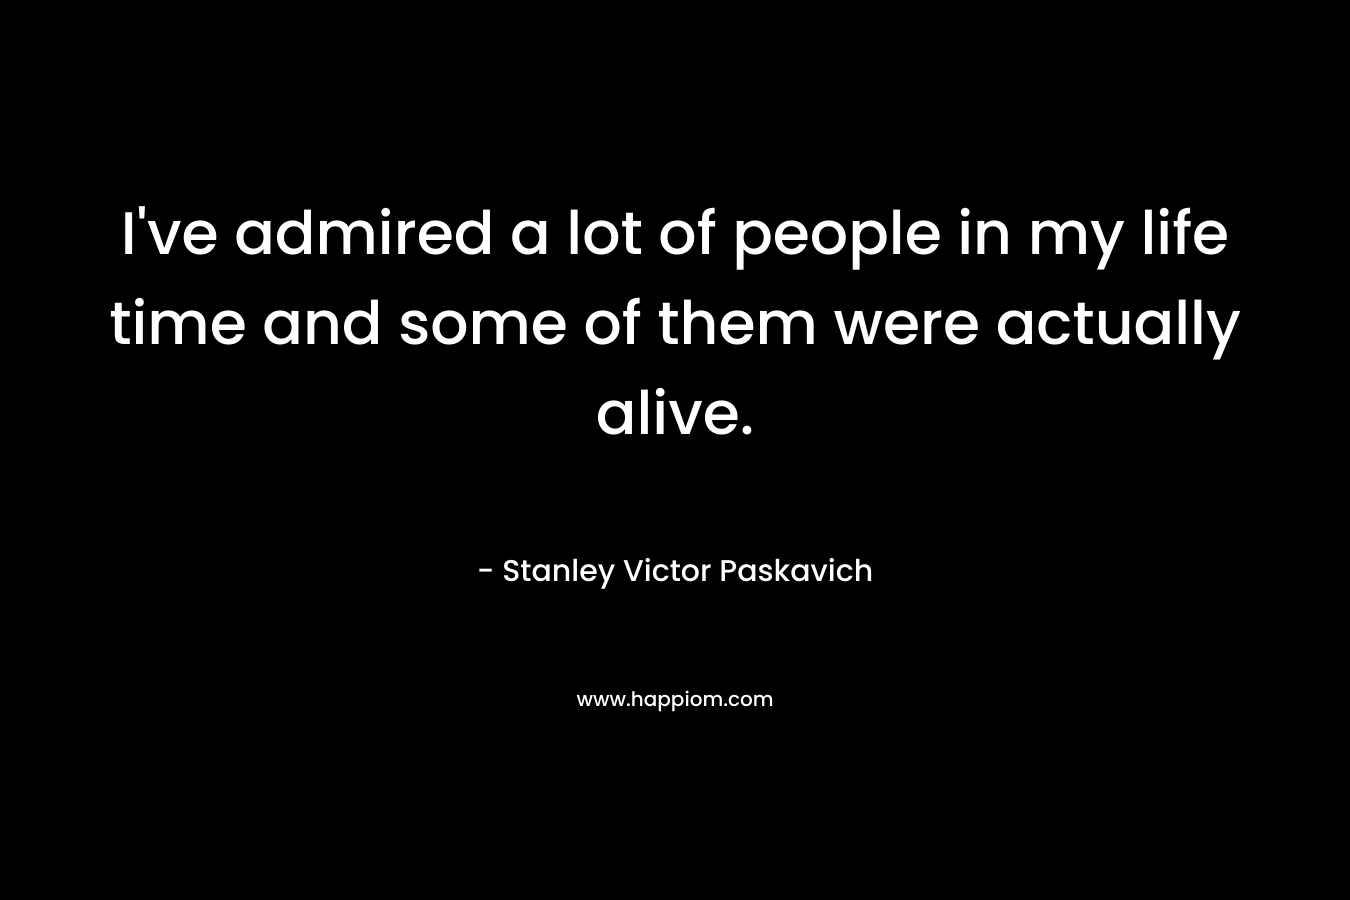 I’ve admired a lot of people in my life time and some of them were actually alive. – Stanley Victor Paskavich